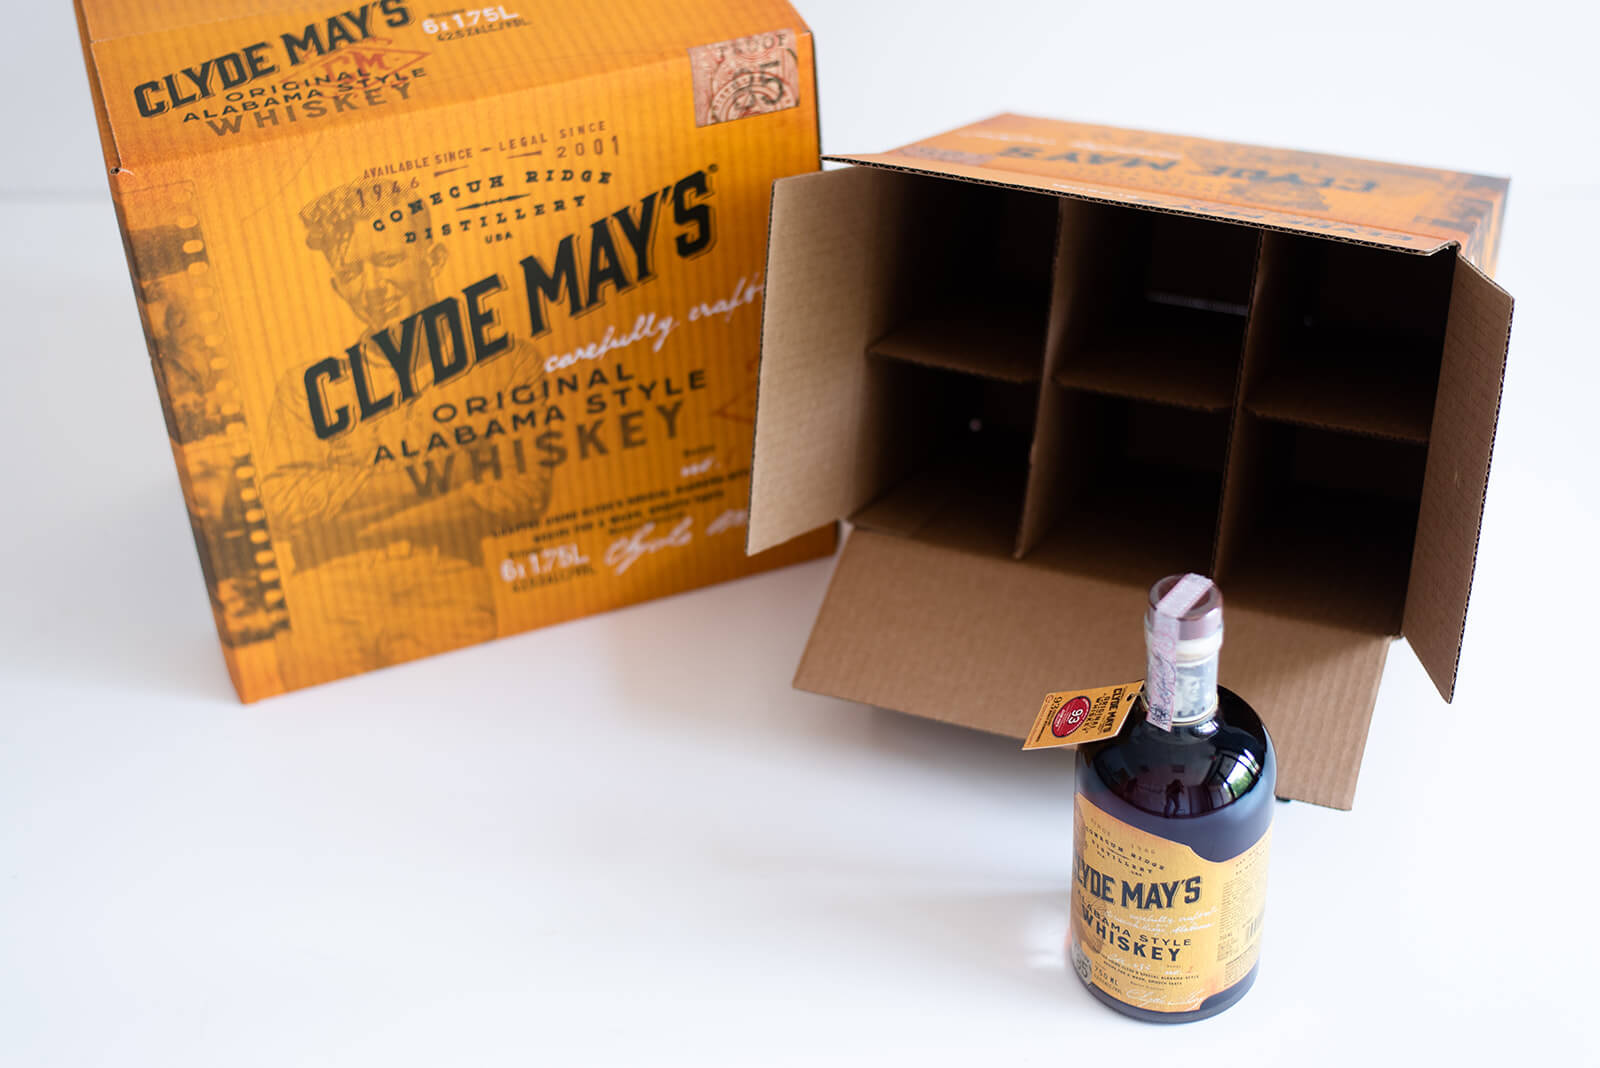 Clyde Mays Bottle and Packaging